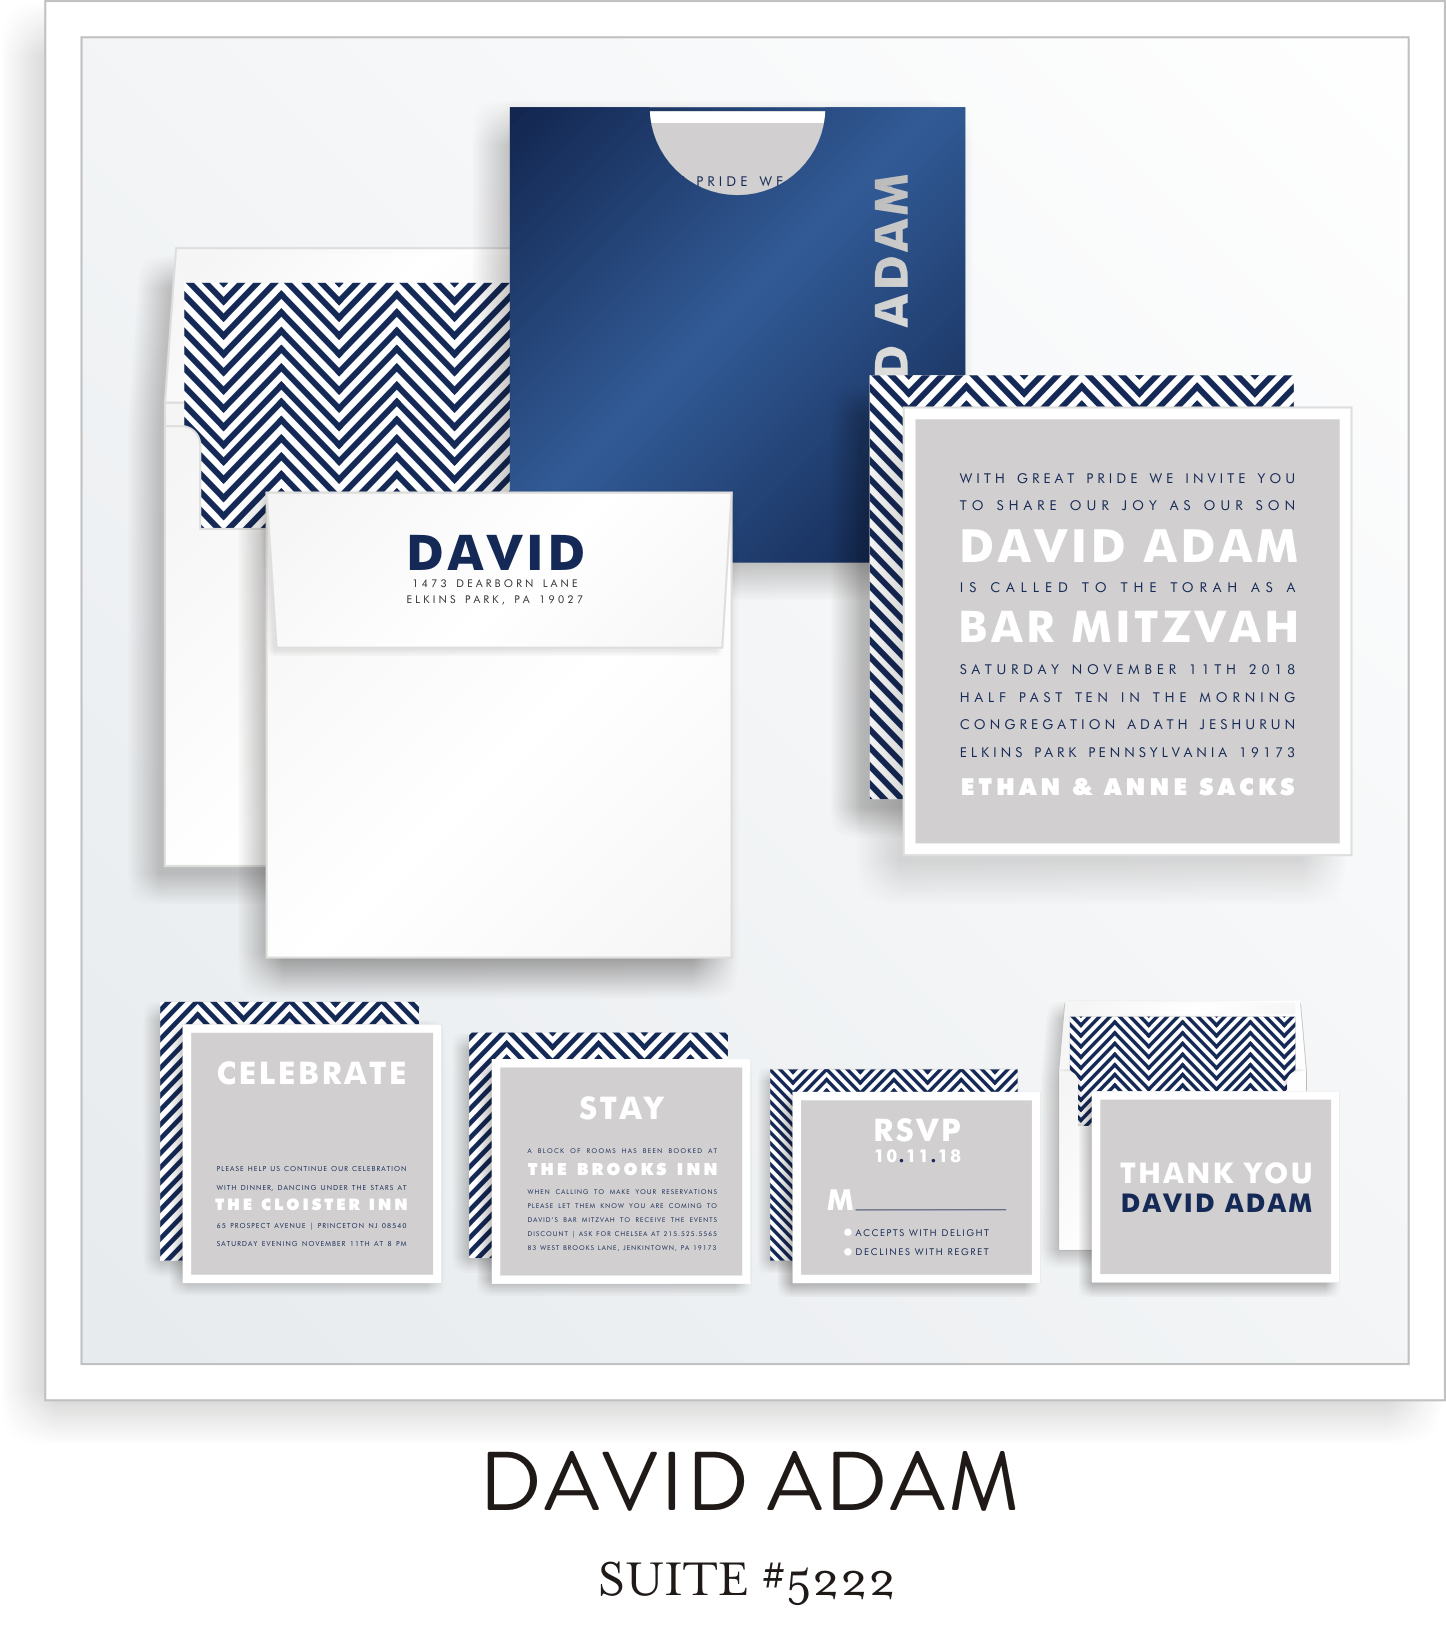 Copy of  <a href=/bar-mitzvah-invitations-5222>Suite Details→</a><strong><a href=/david-adam-in-colors>see more colors→</a></strong>